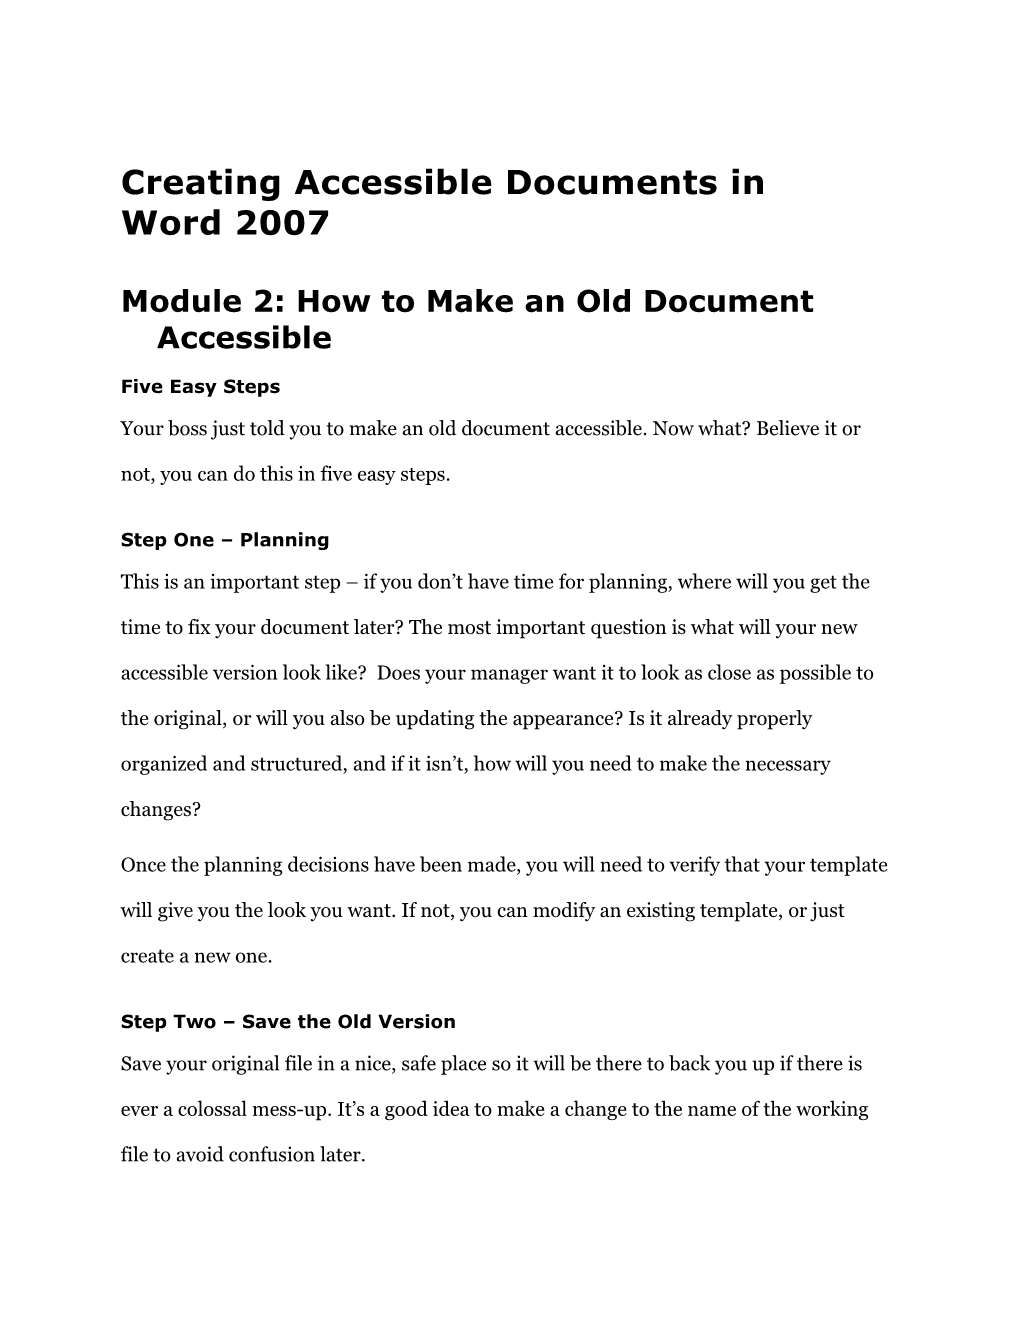 Module 2: How to Make an Old Document Accessible